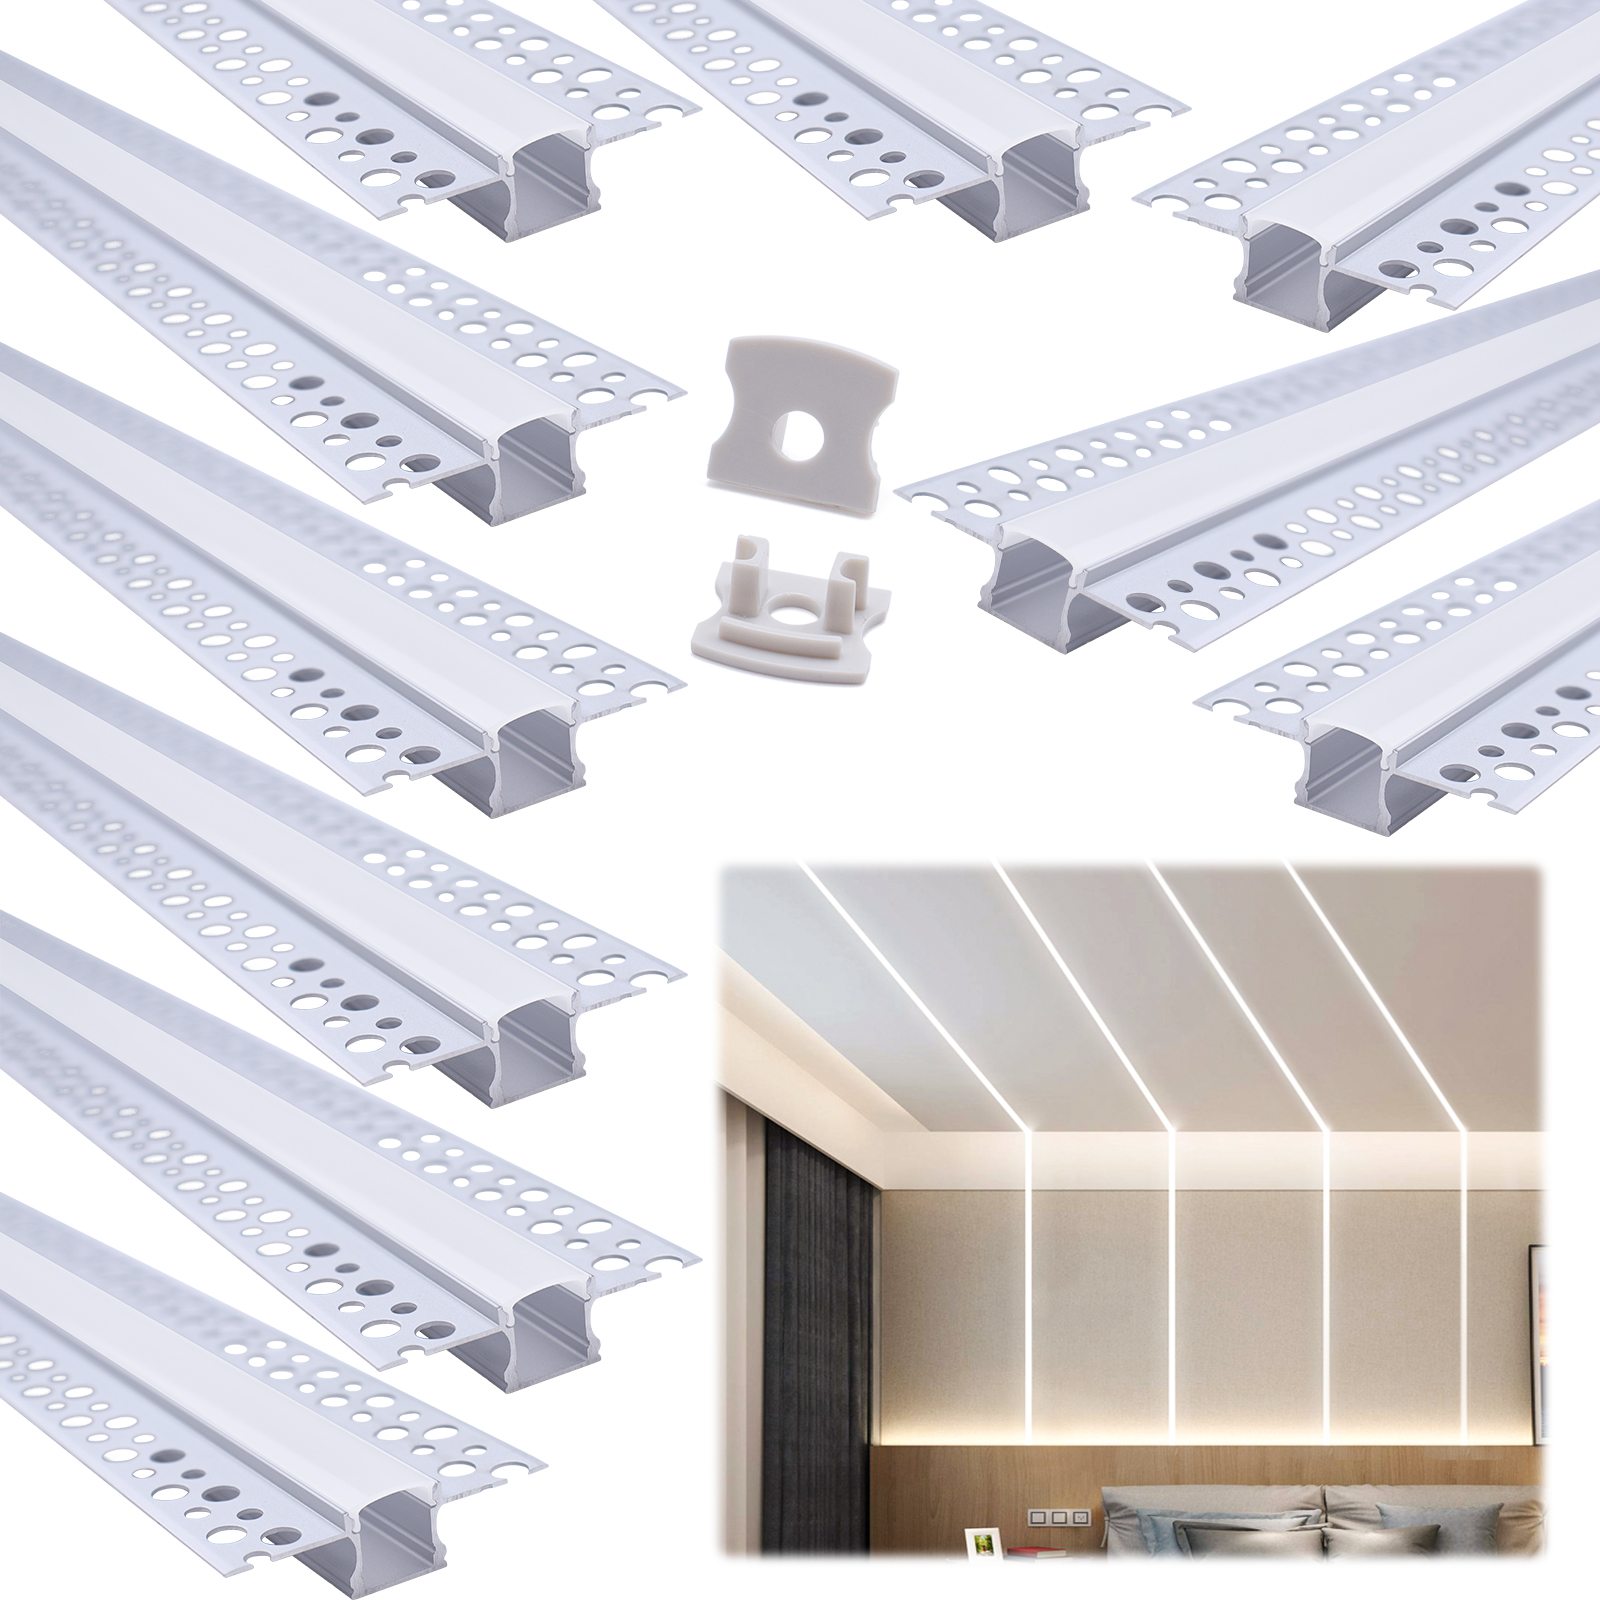 Plaster in Trimless LED Channel System Recessed Housing Track | Muzata USA